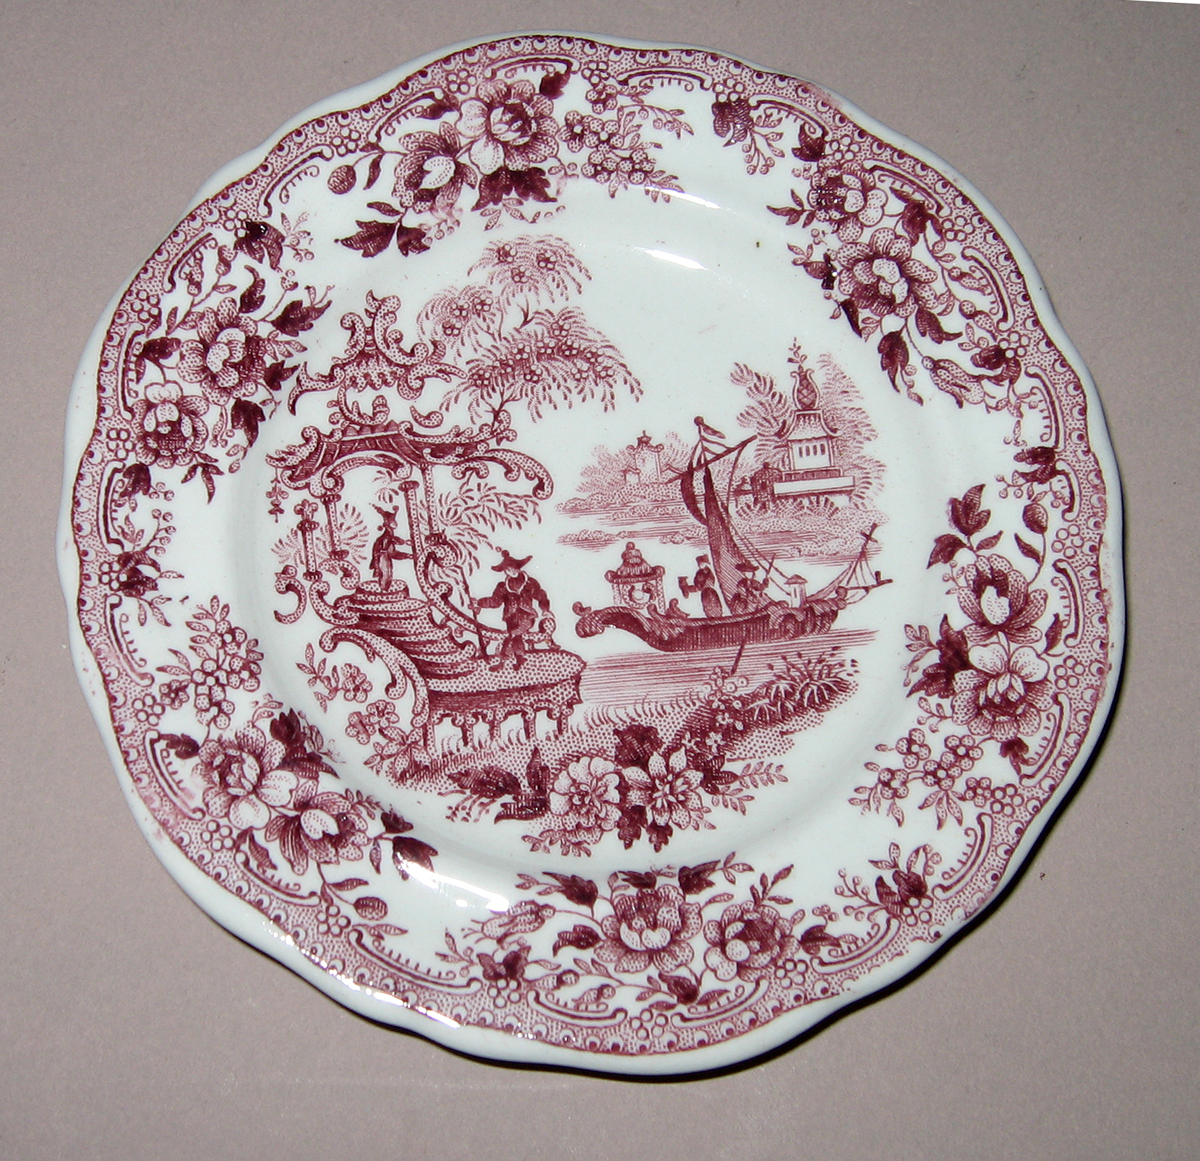 1955.0136.186 Miniature plate with chinoiserie printed scene